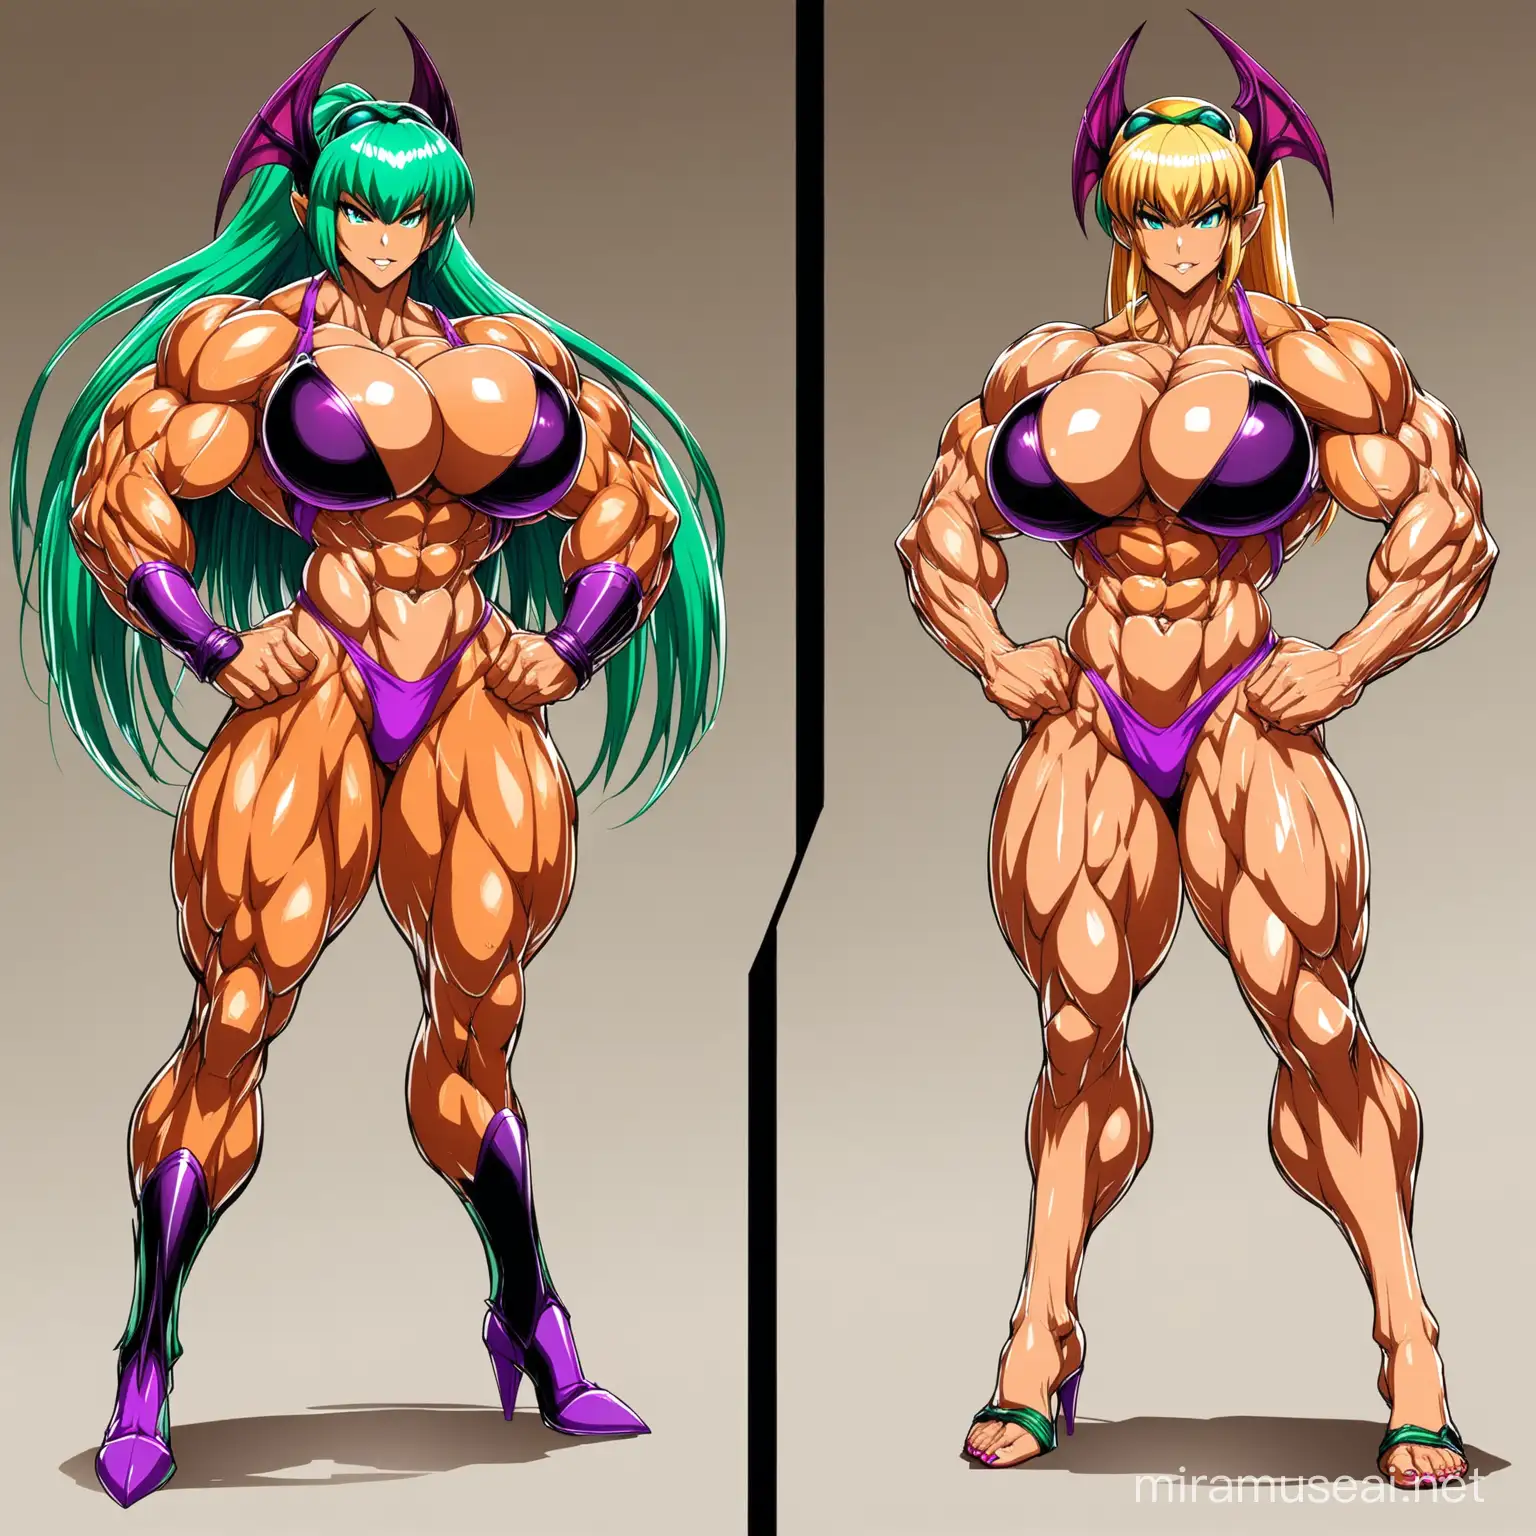 Fusion of: (((Generalissimo Samus Aran from "Metroid" Empress Morrigan Aensland from "Darkstalkers"))), (((amazingly extra gigantic breasts))),(((muscularly voluptuous body))),((((muscular abs,tanned-skin)))), by artist Kentaro Miura,